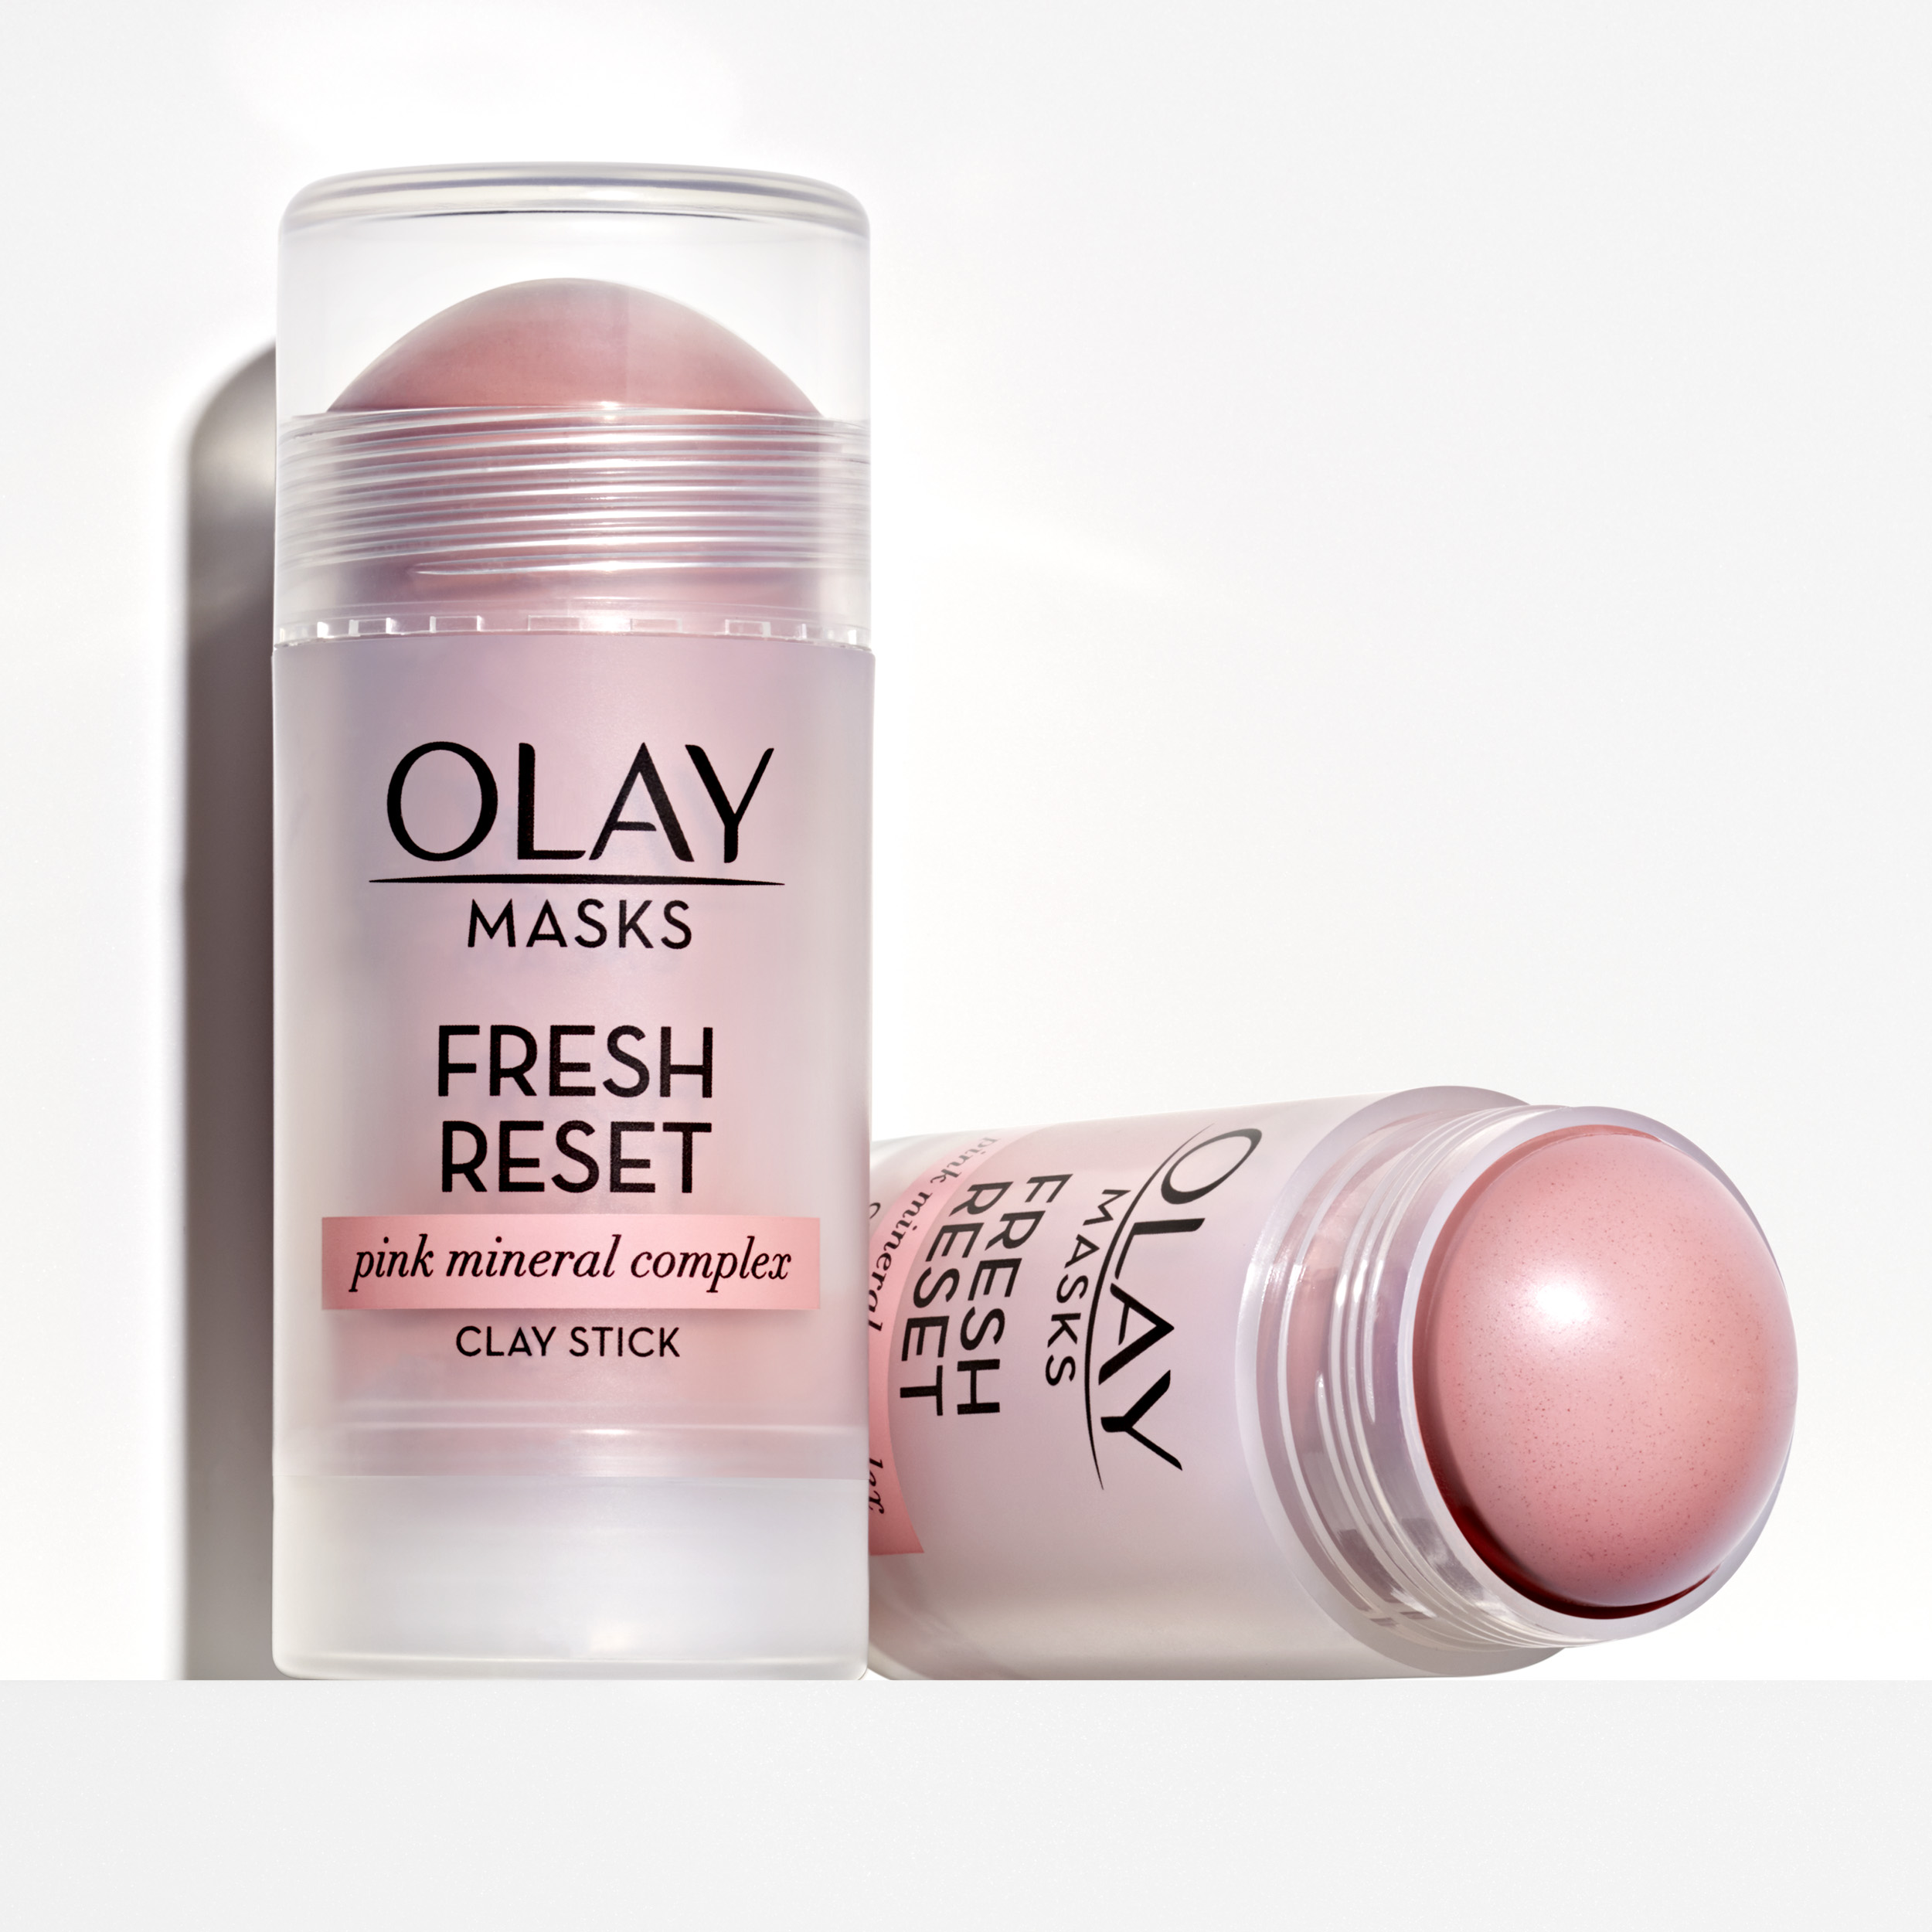 Olay Face Mask Stick, Fresh Reset, Pink Mineral Clay Complex, 1.7 oz - image 8 of 12